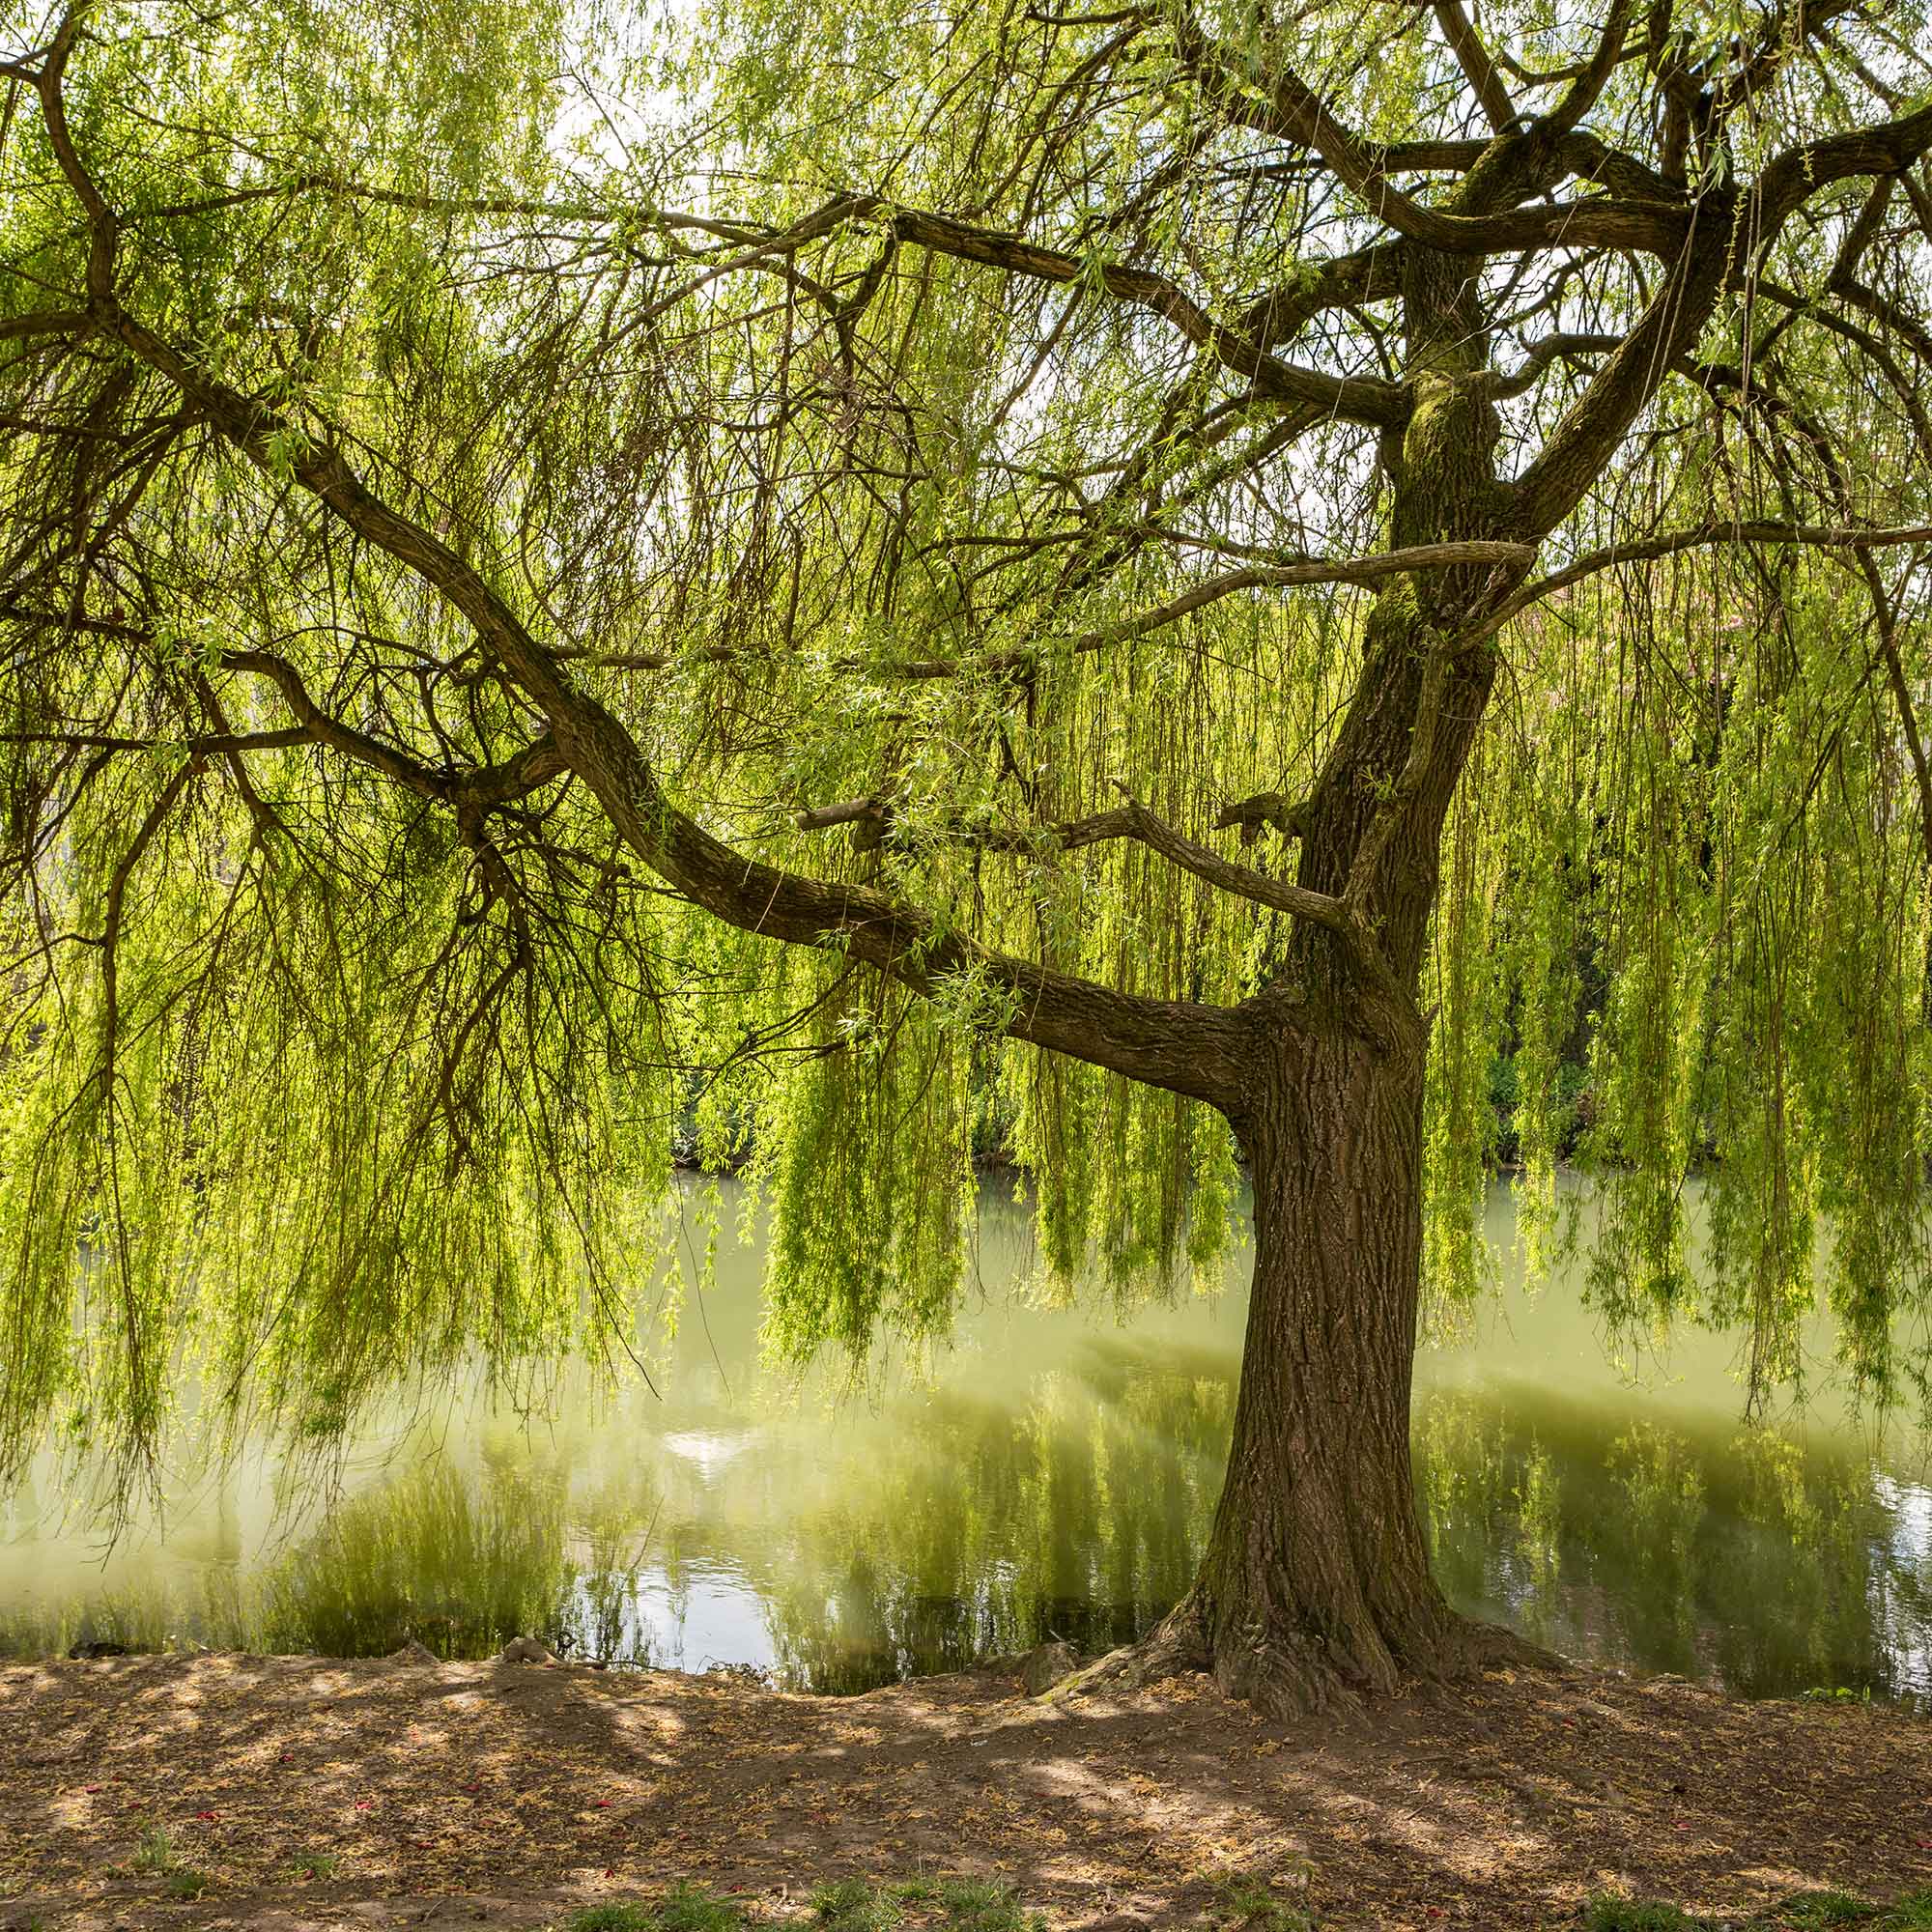 Salix babylonica-Weeping Willow near pond